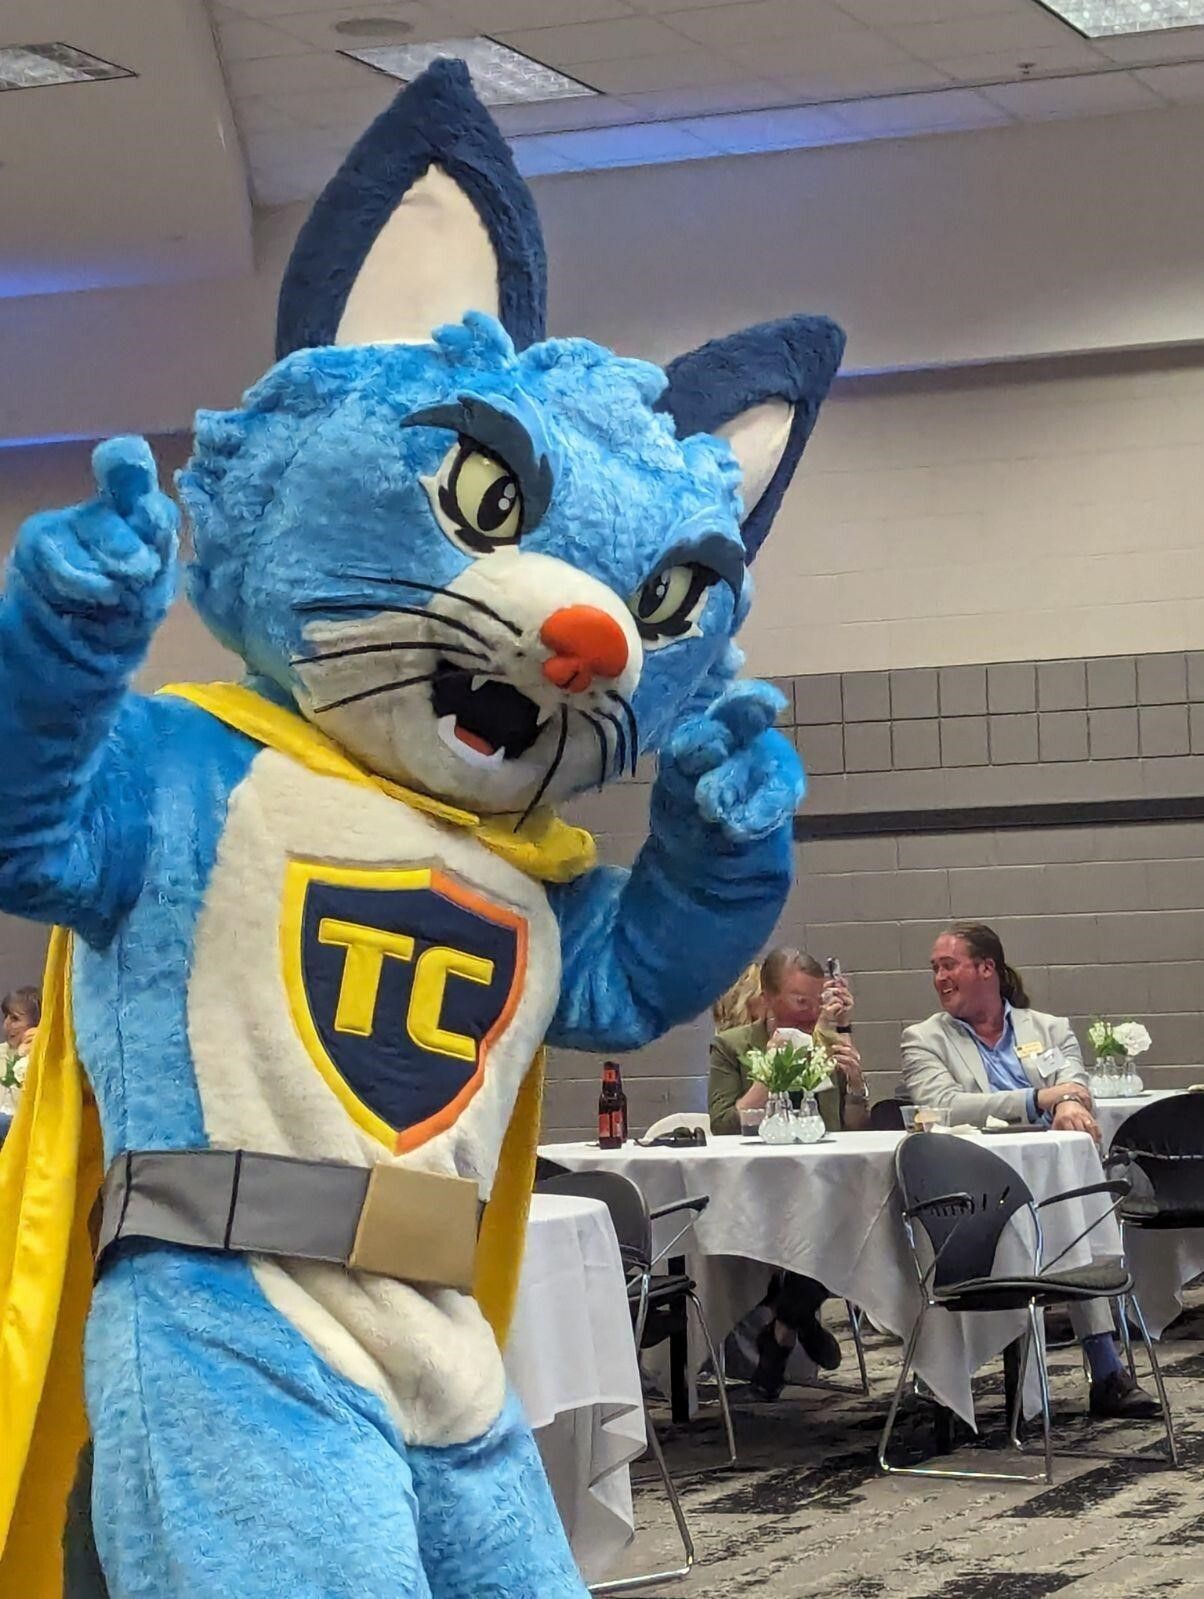 A person in a blue cat costume that has a "TC" crest on its chest and is wearing a yellow cape